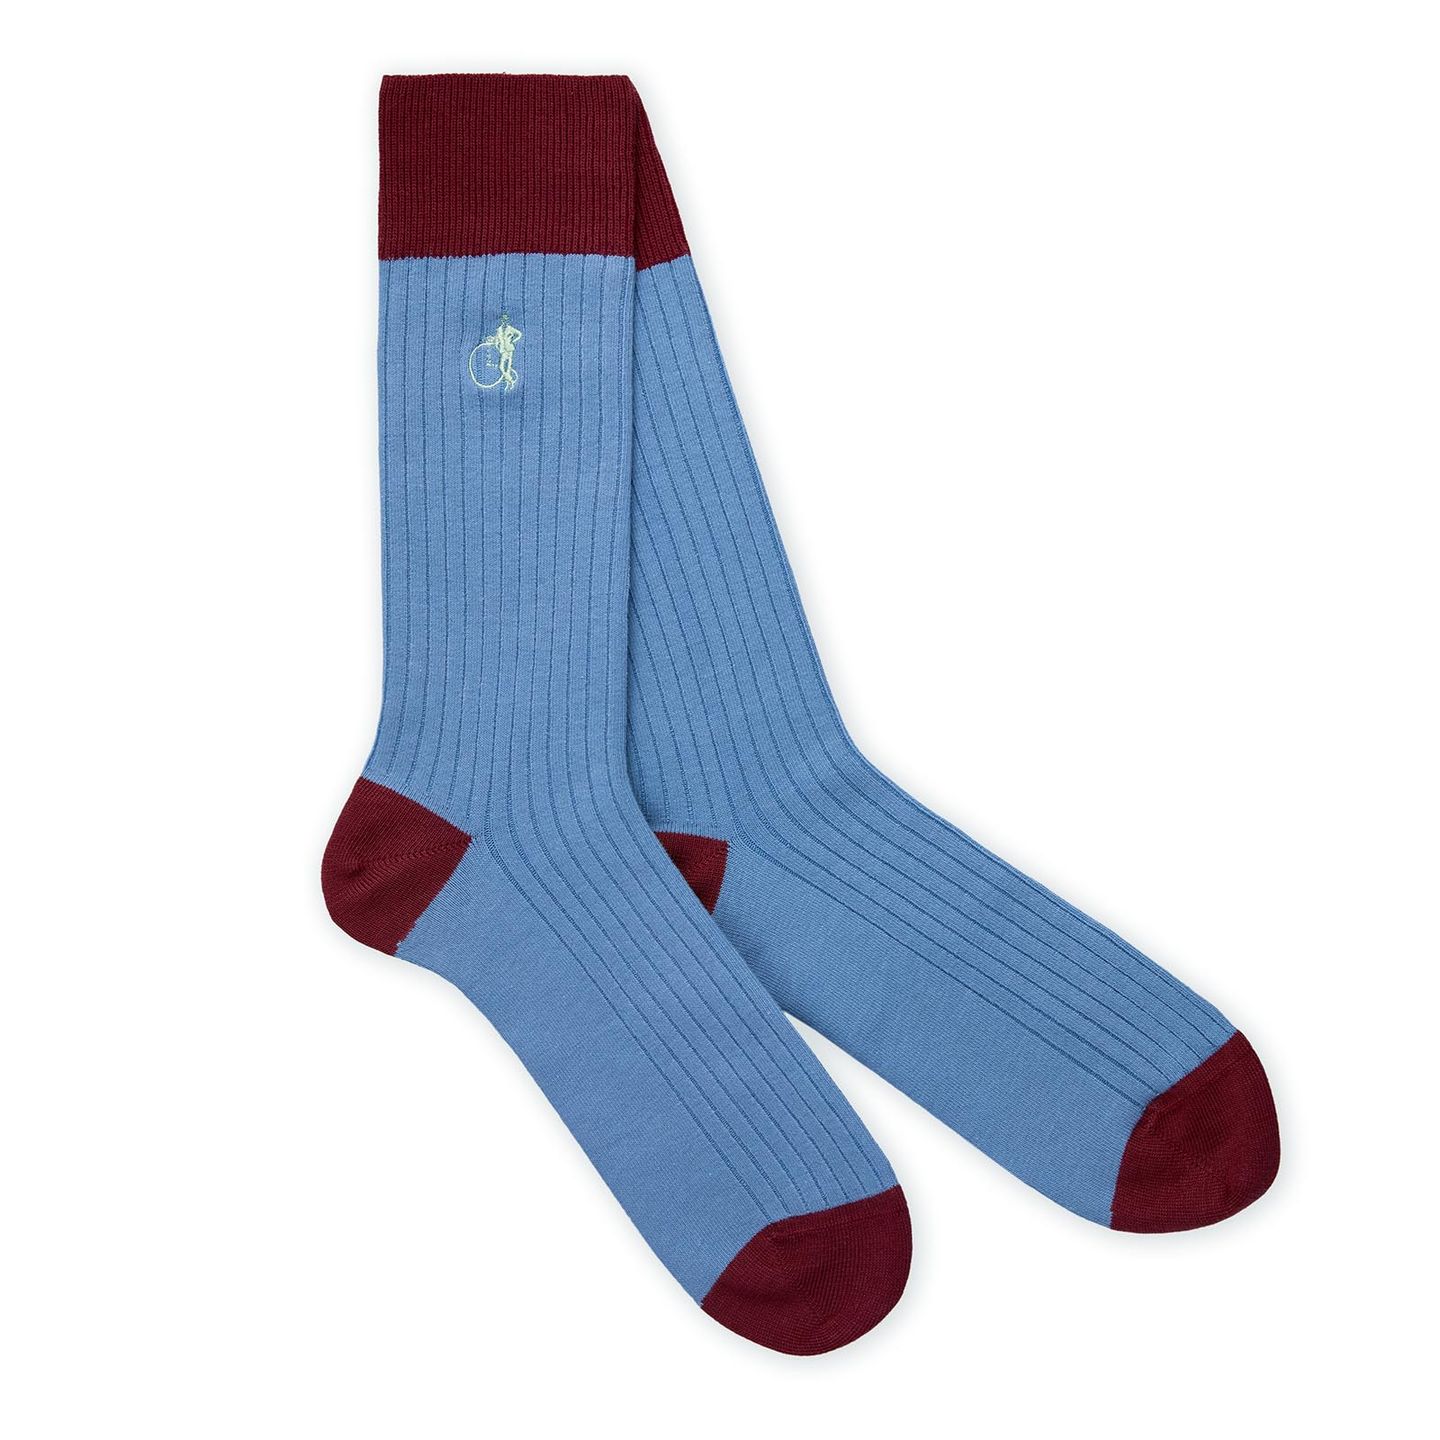 A pair of blue and red socks with a white background